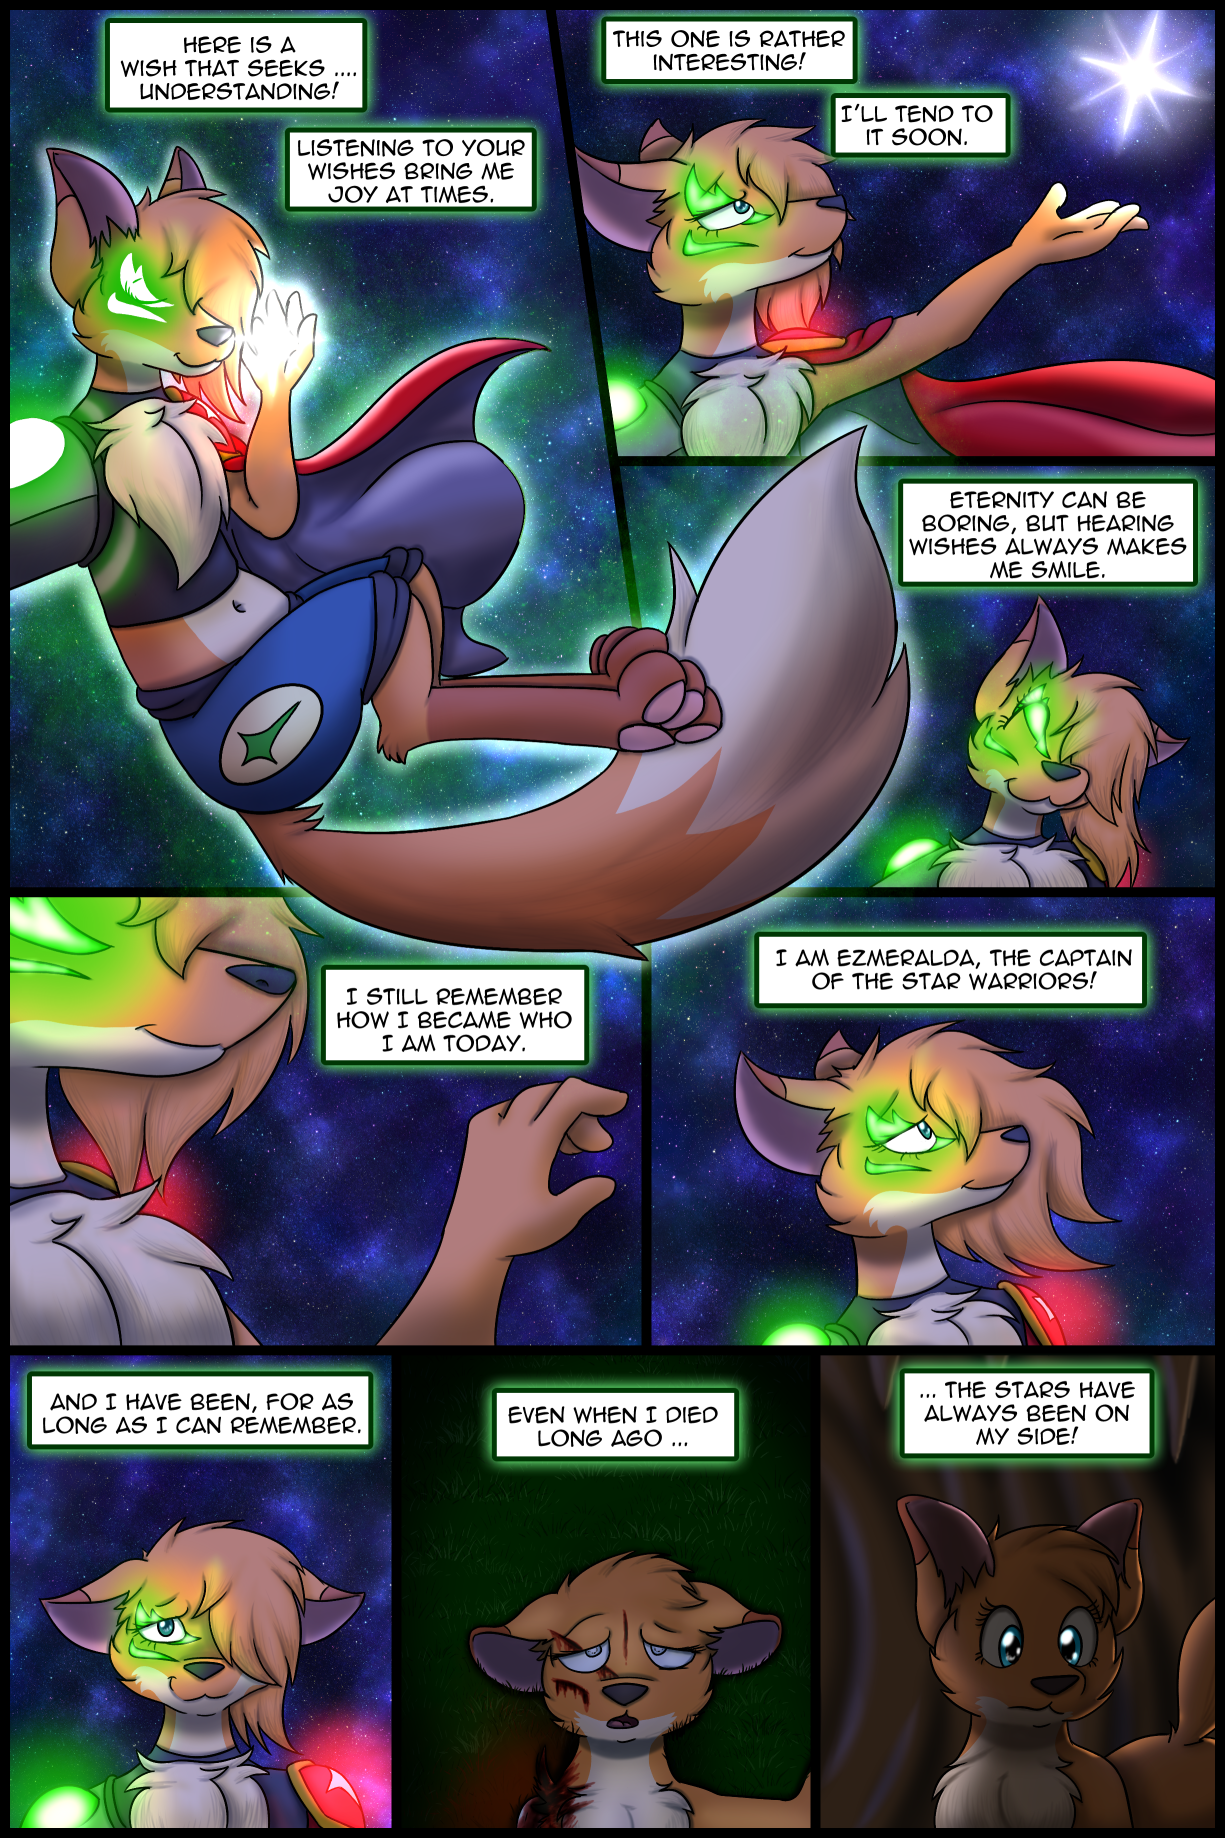 Ch0 Remastered Page 5-6 – Pastime – My Death Long Ago